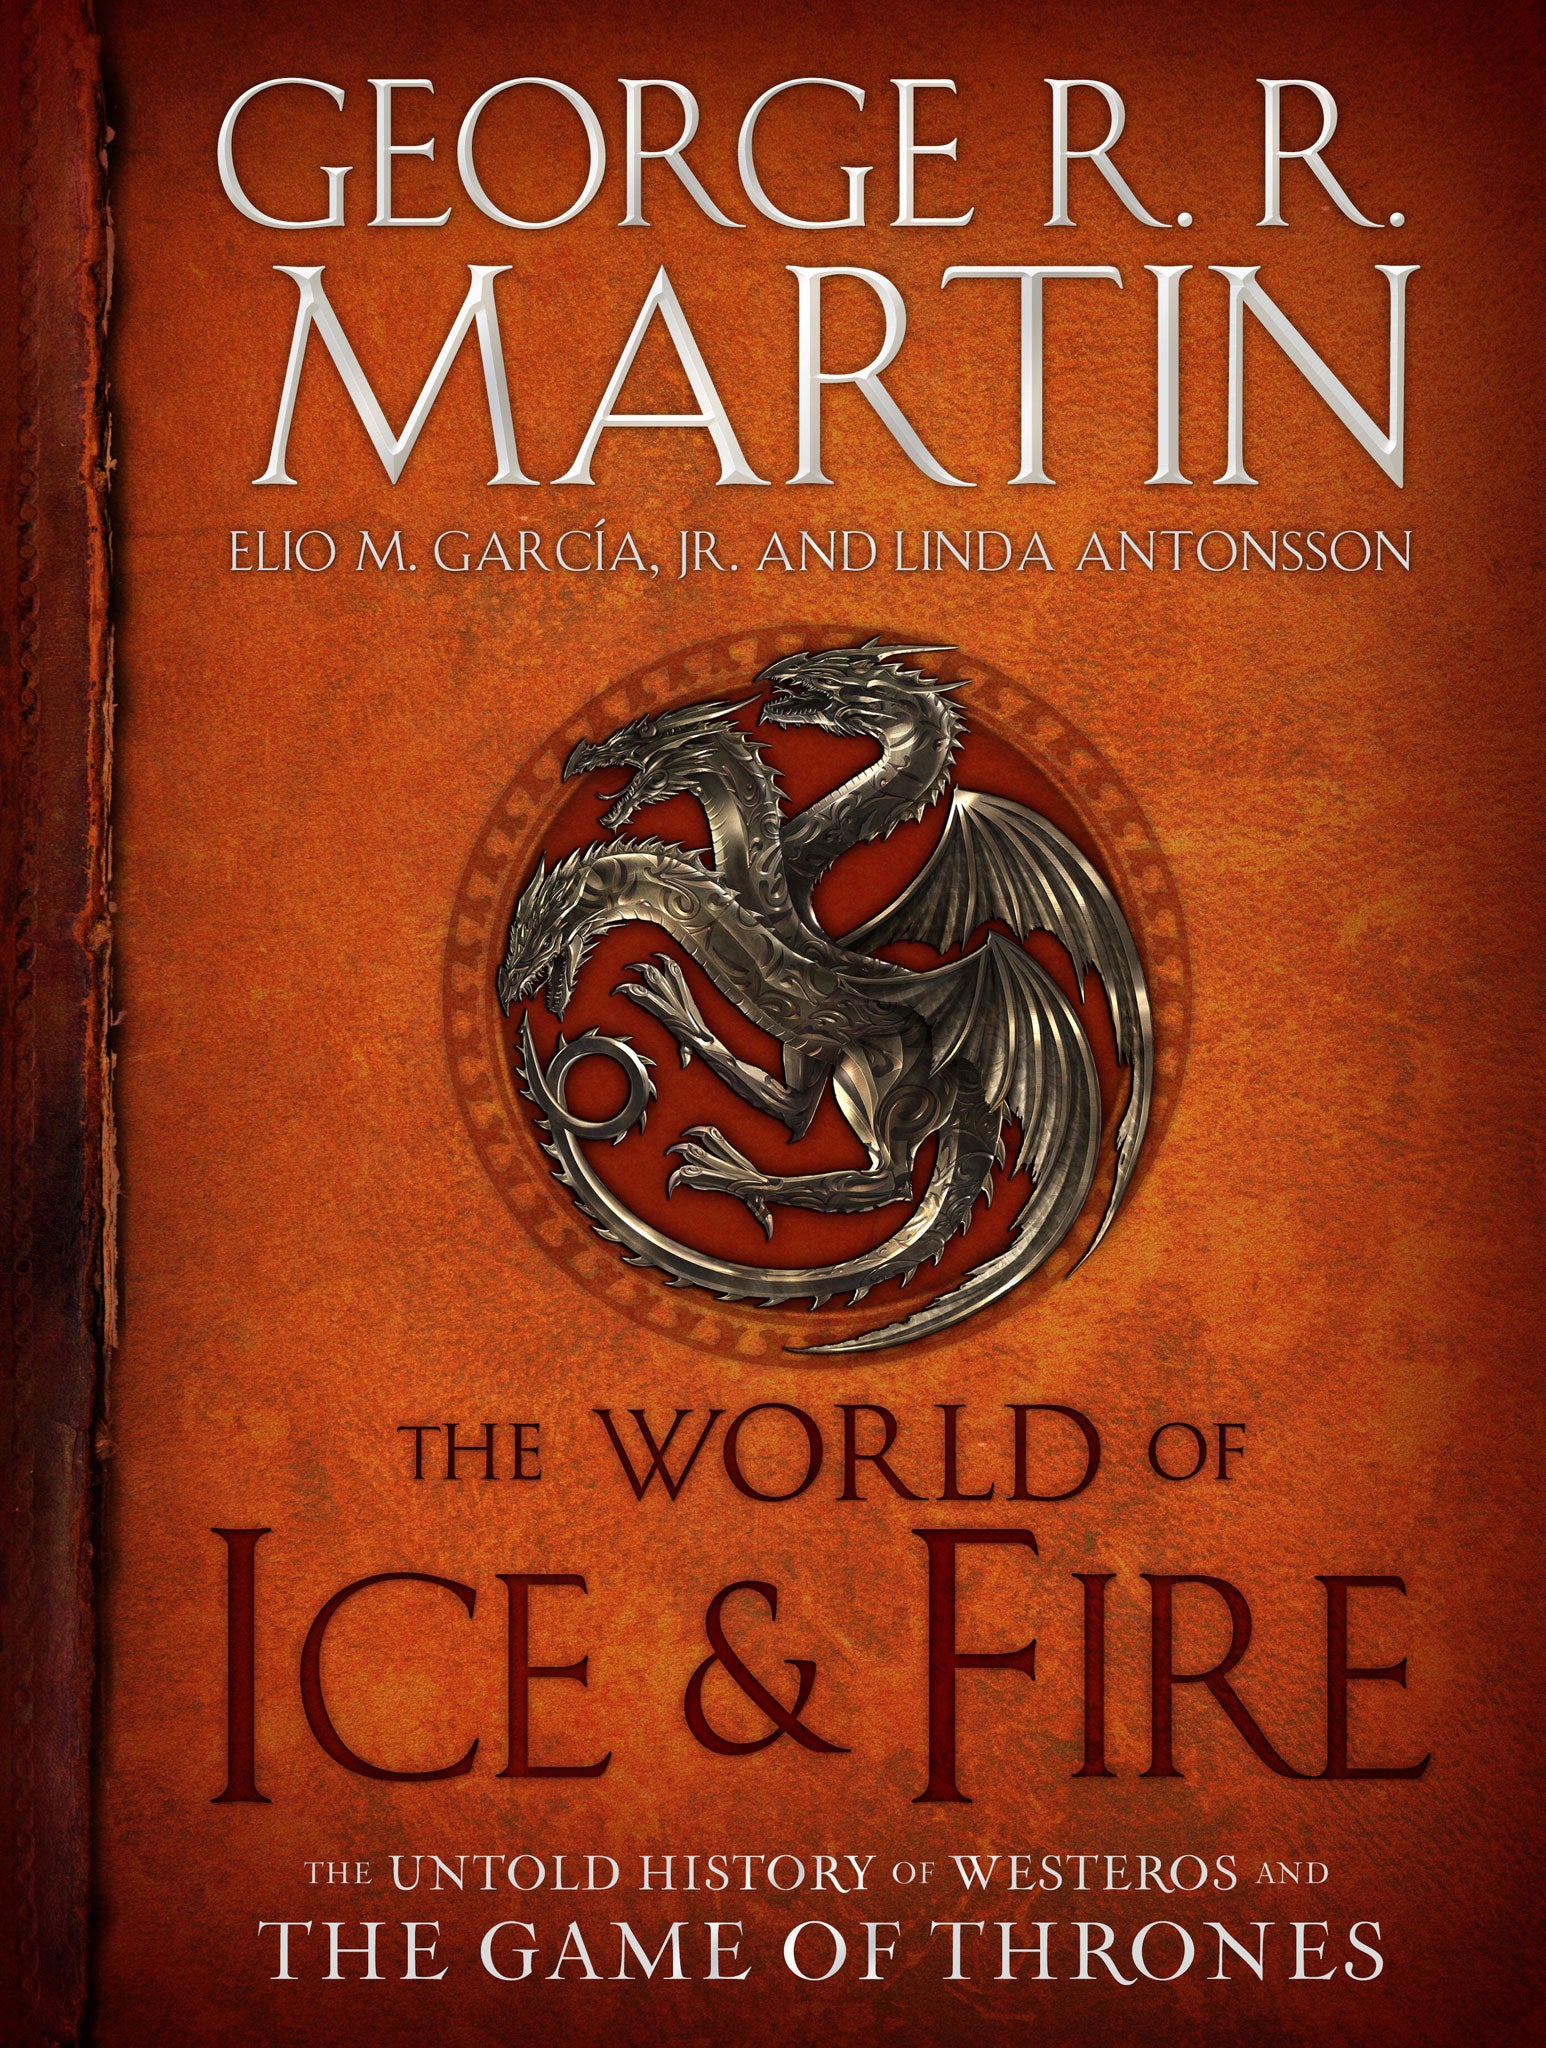 George RR Martin's The World of Ice & Fire